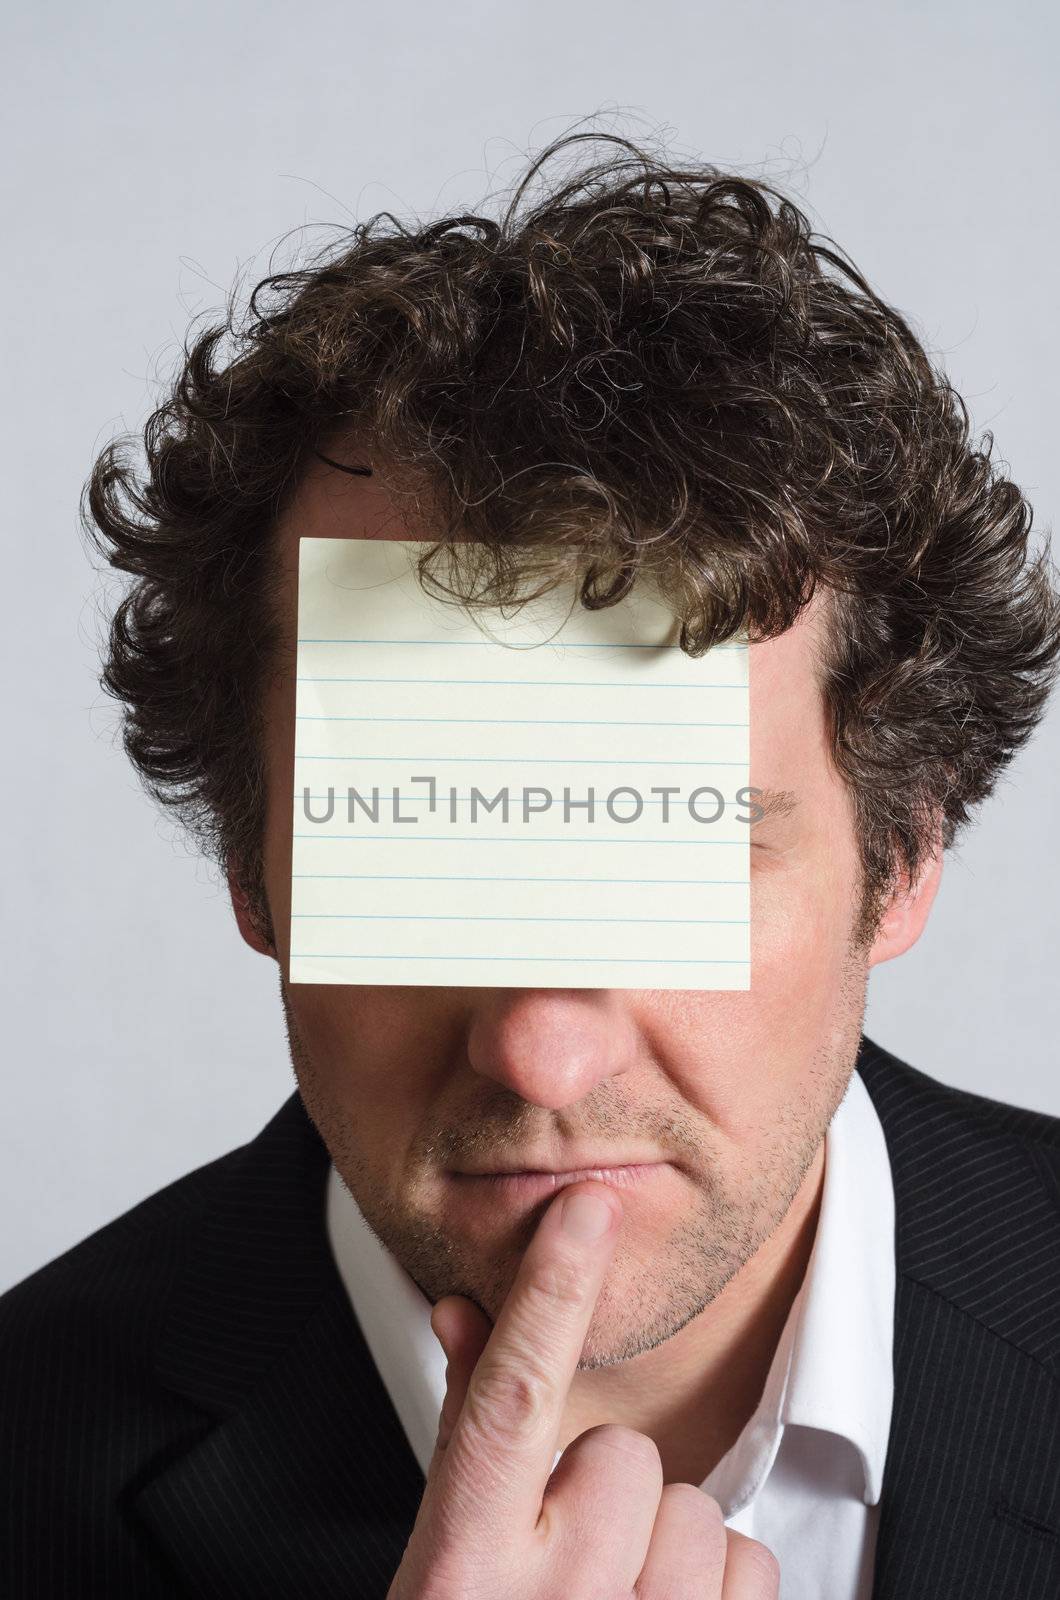 A curly haired man in a suit with shirt slightly open and no tie, resting finger on chin in a contemplative manner, with a blank, lined yellow sticky note on his forehead, facing the camera.